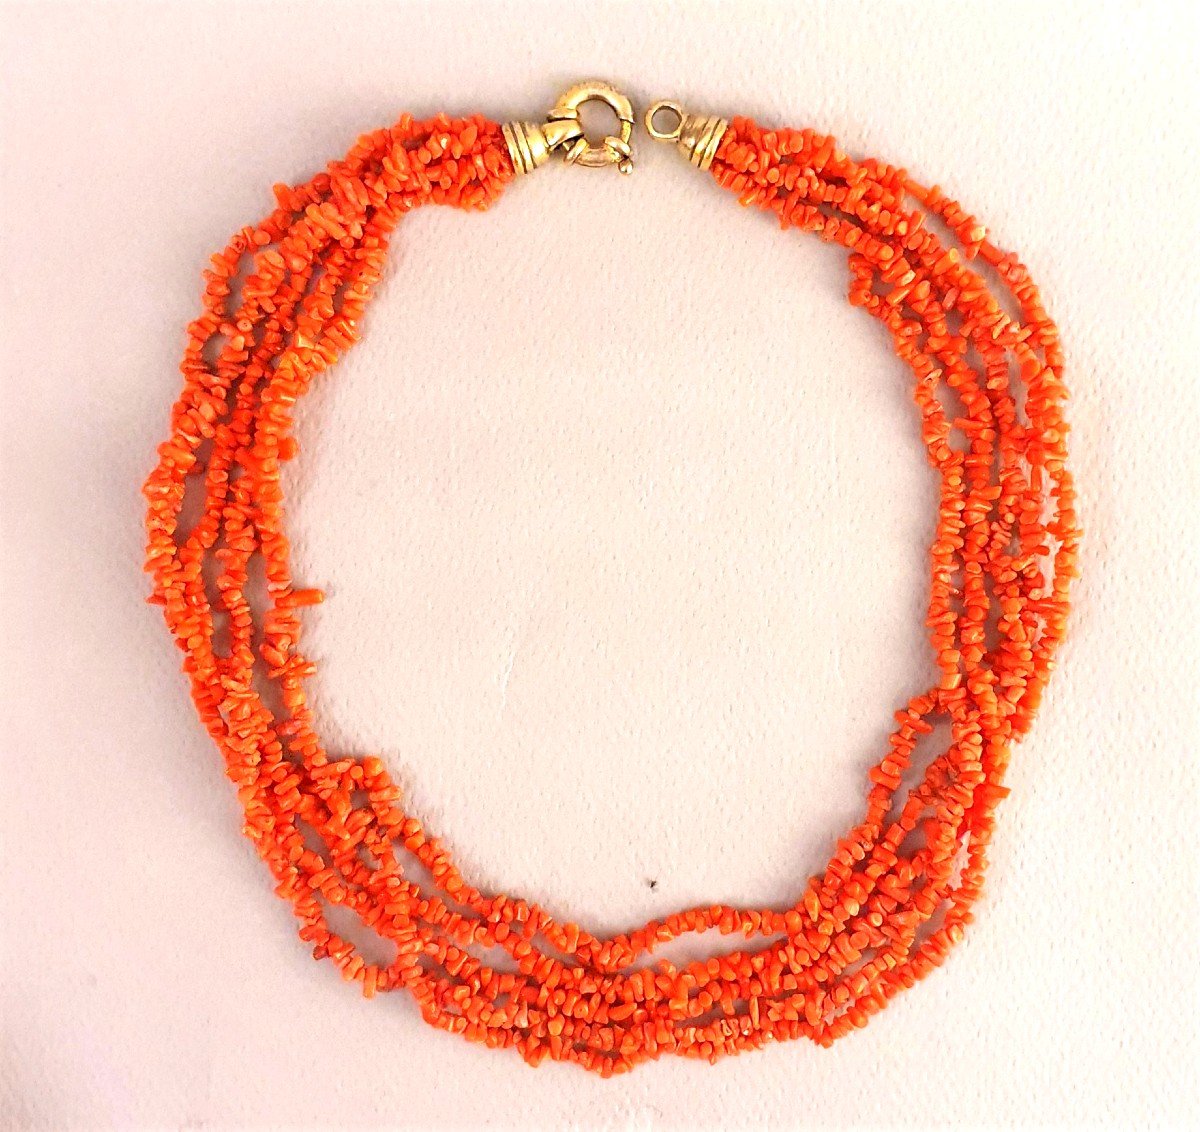 Necklace Of 5 Rows Of Mediterranean Red Coral Twigs - Vermeil Clasp With Caps